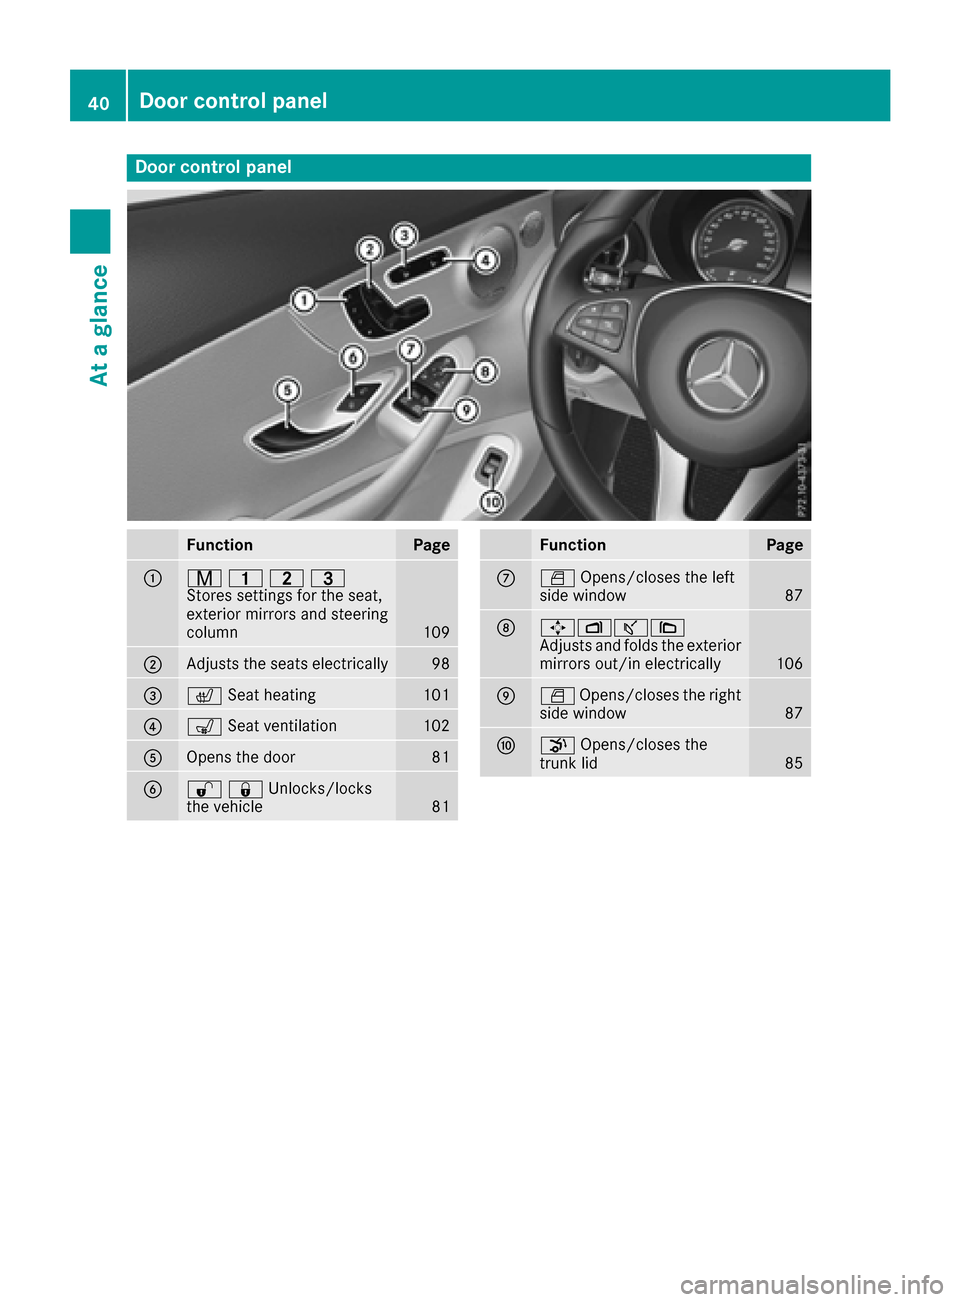 MERCEDES-BENZ C-Class COUPE 2017 CL205 Owners Manual Door controlpanel
FunctionPage
:r 45=
Stores settings for the seat,
exterior mirrors and steering
column
109
;Adjusts the seats electrically98
=c Seath eating101
?sSeatv entilation102
AOpens the door8